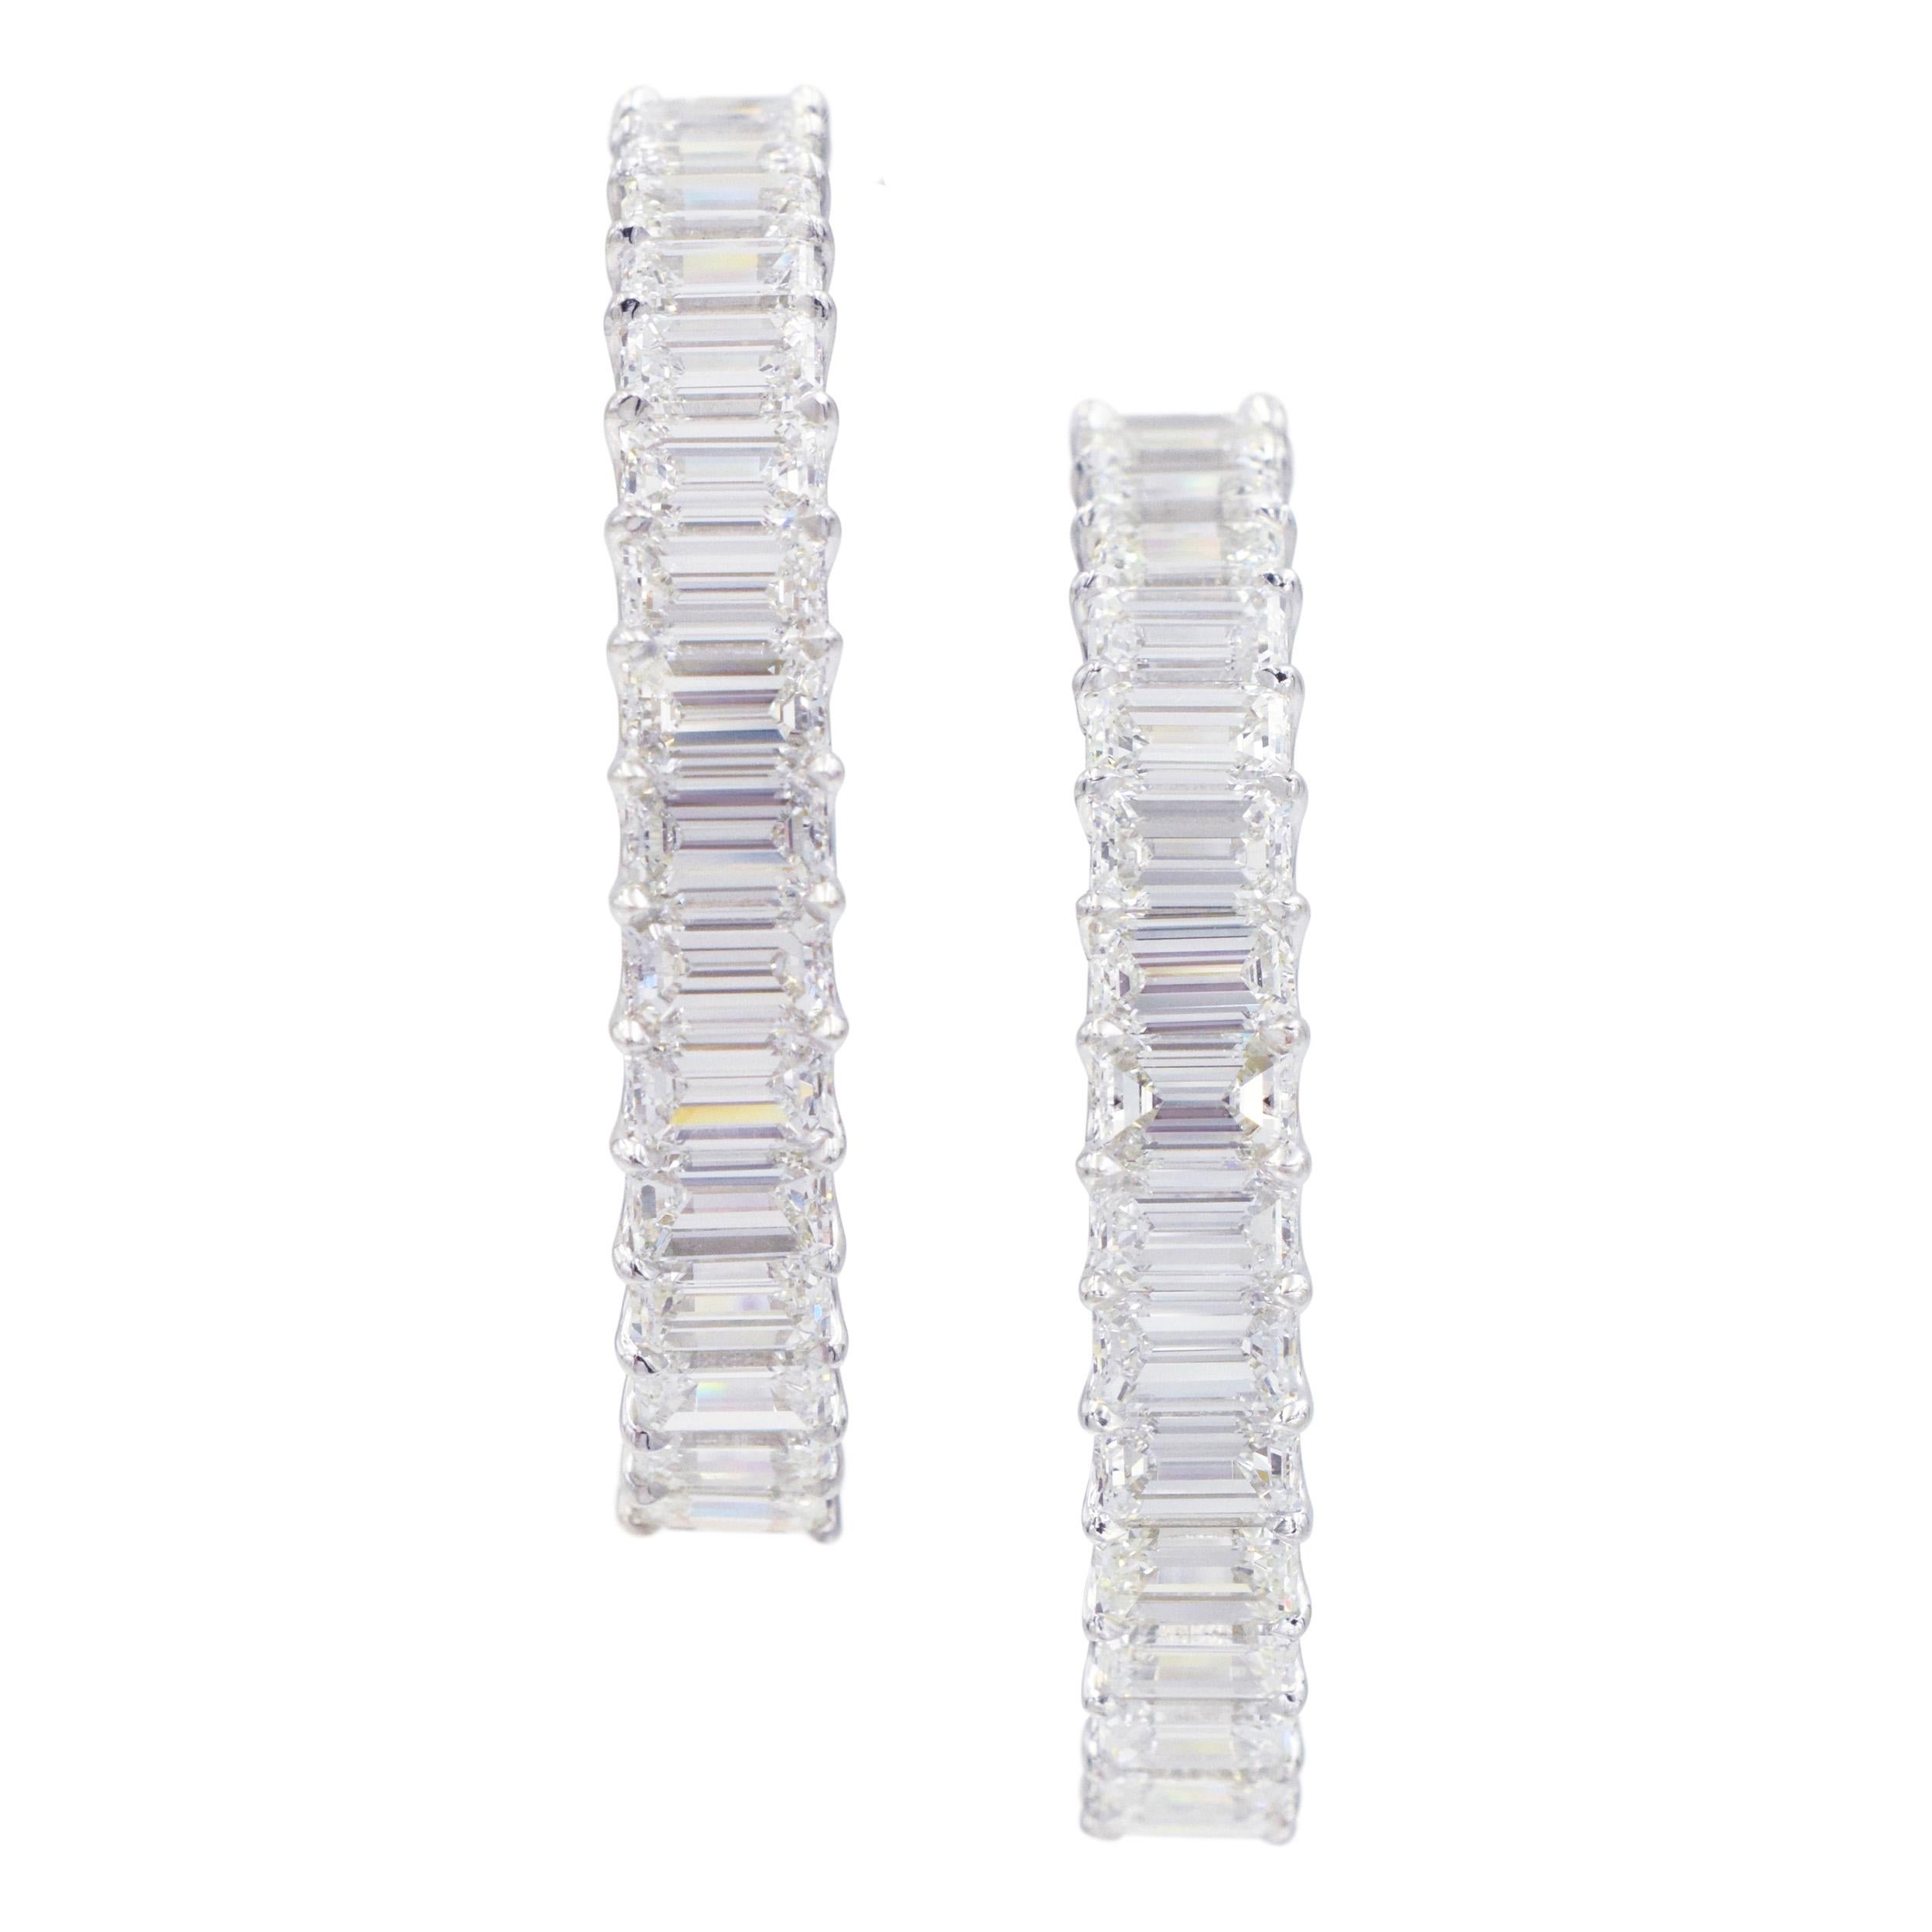 Hoop Earrings Inside-Out with Emerald Cut Diamonds For Sale 4